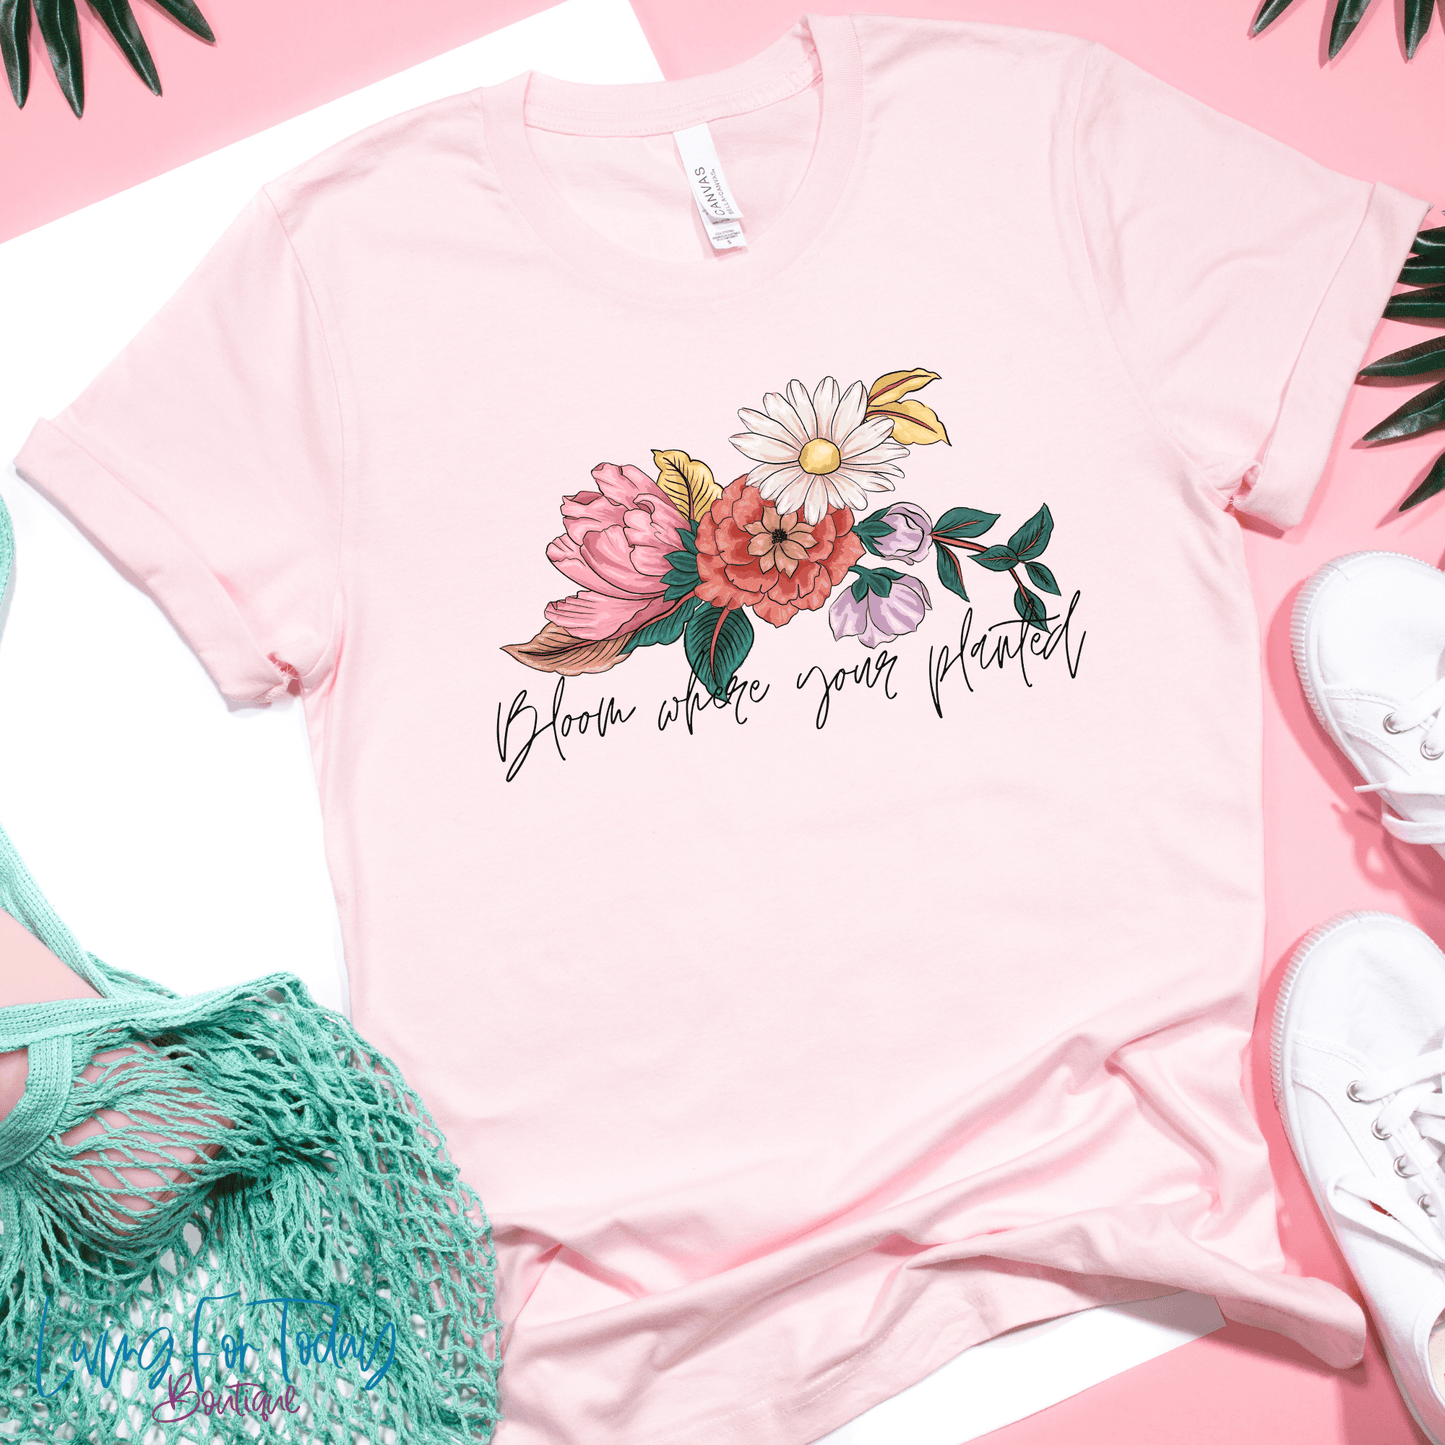 Bloom Where Your Planted Graphic Tee